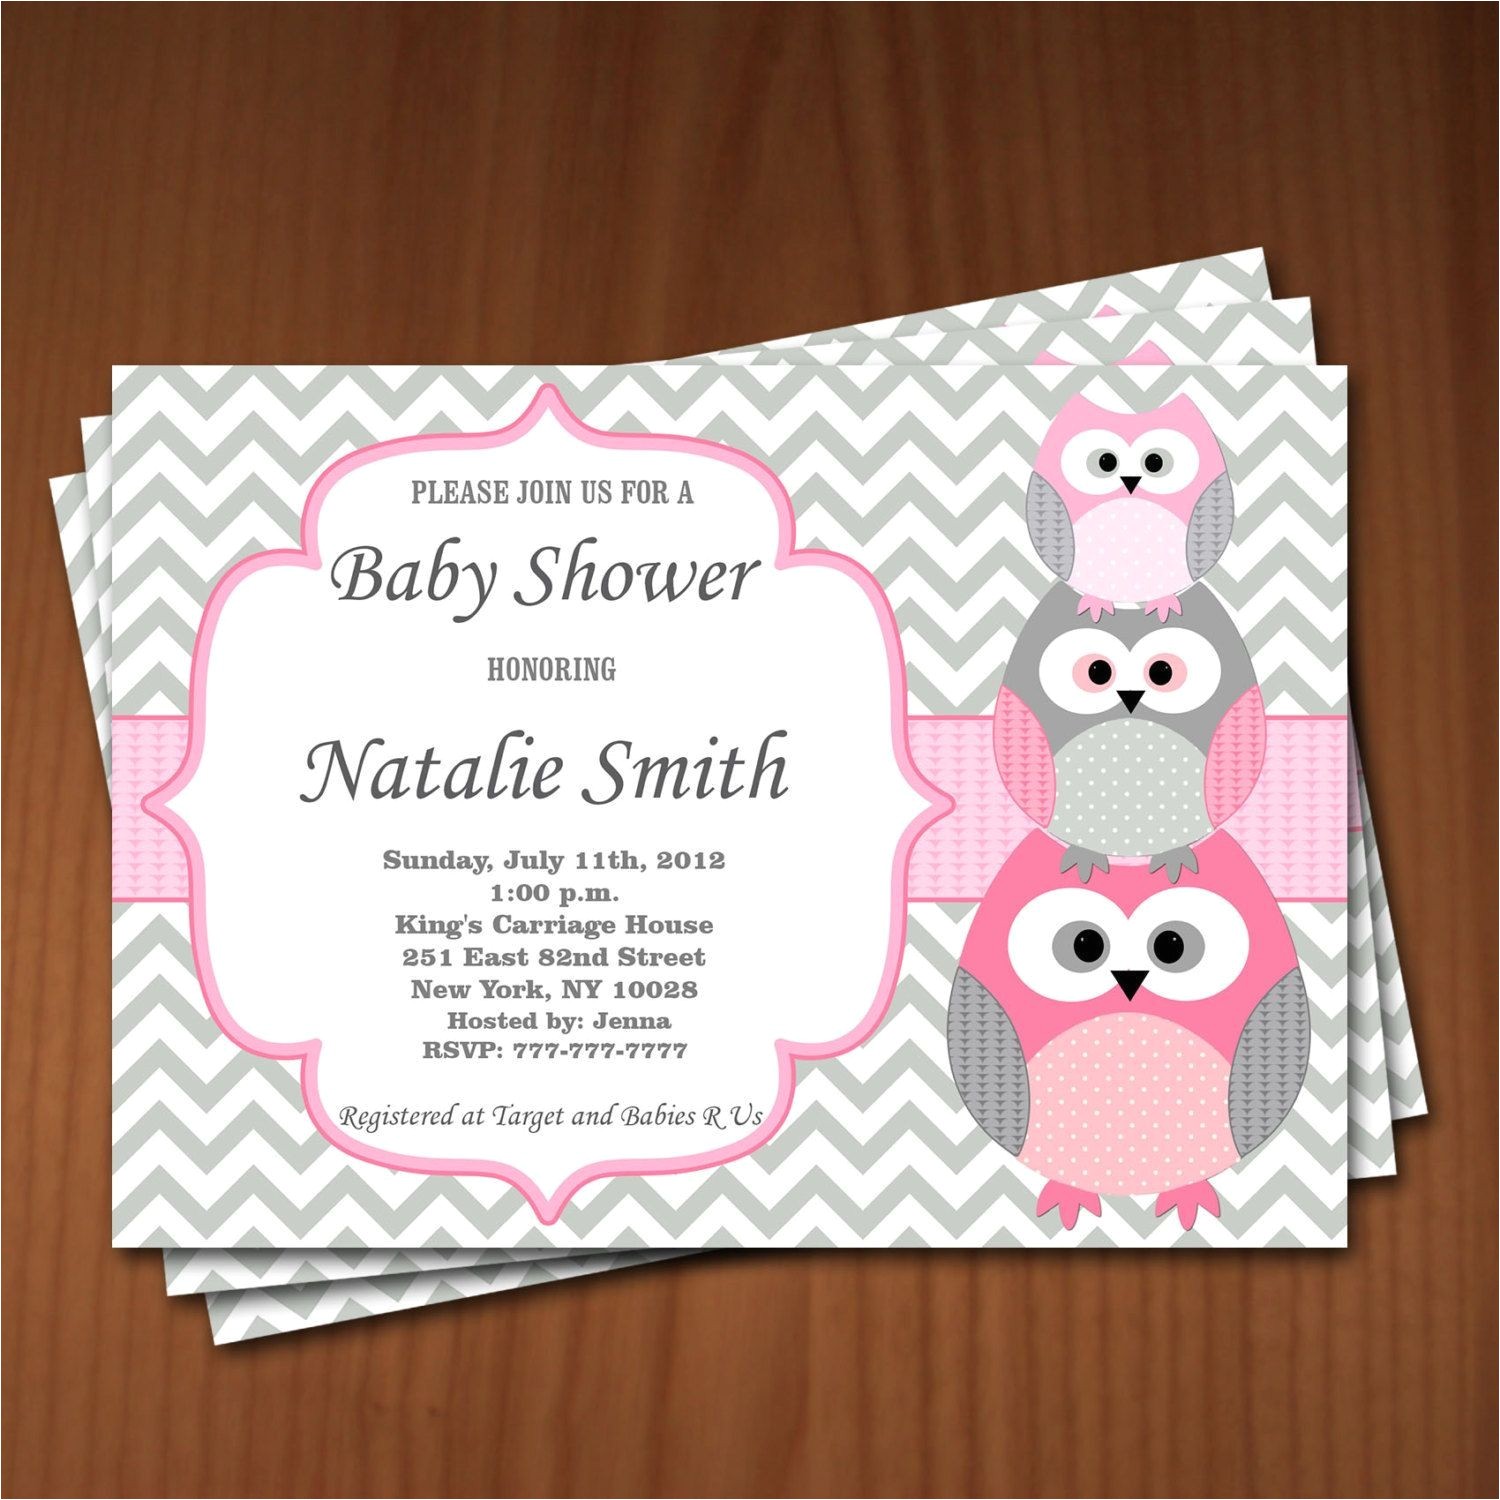 beauty and the beast baby shower invitations inspirational how to fill out a baby shower invitation